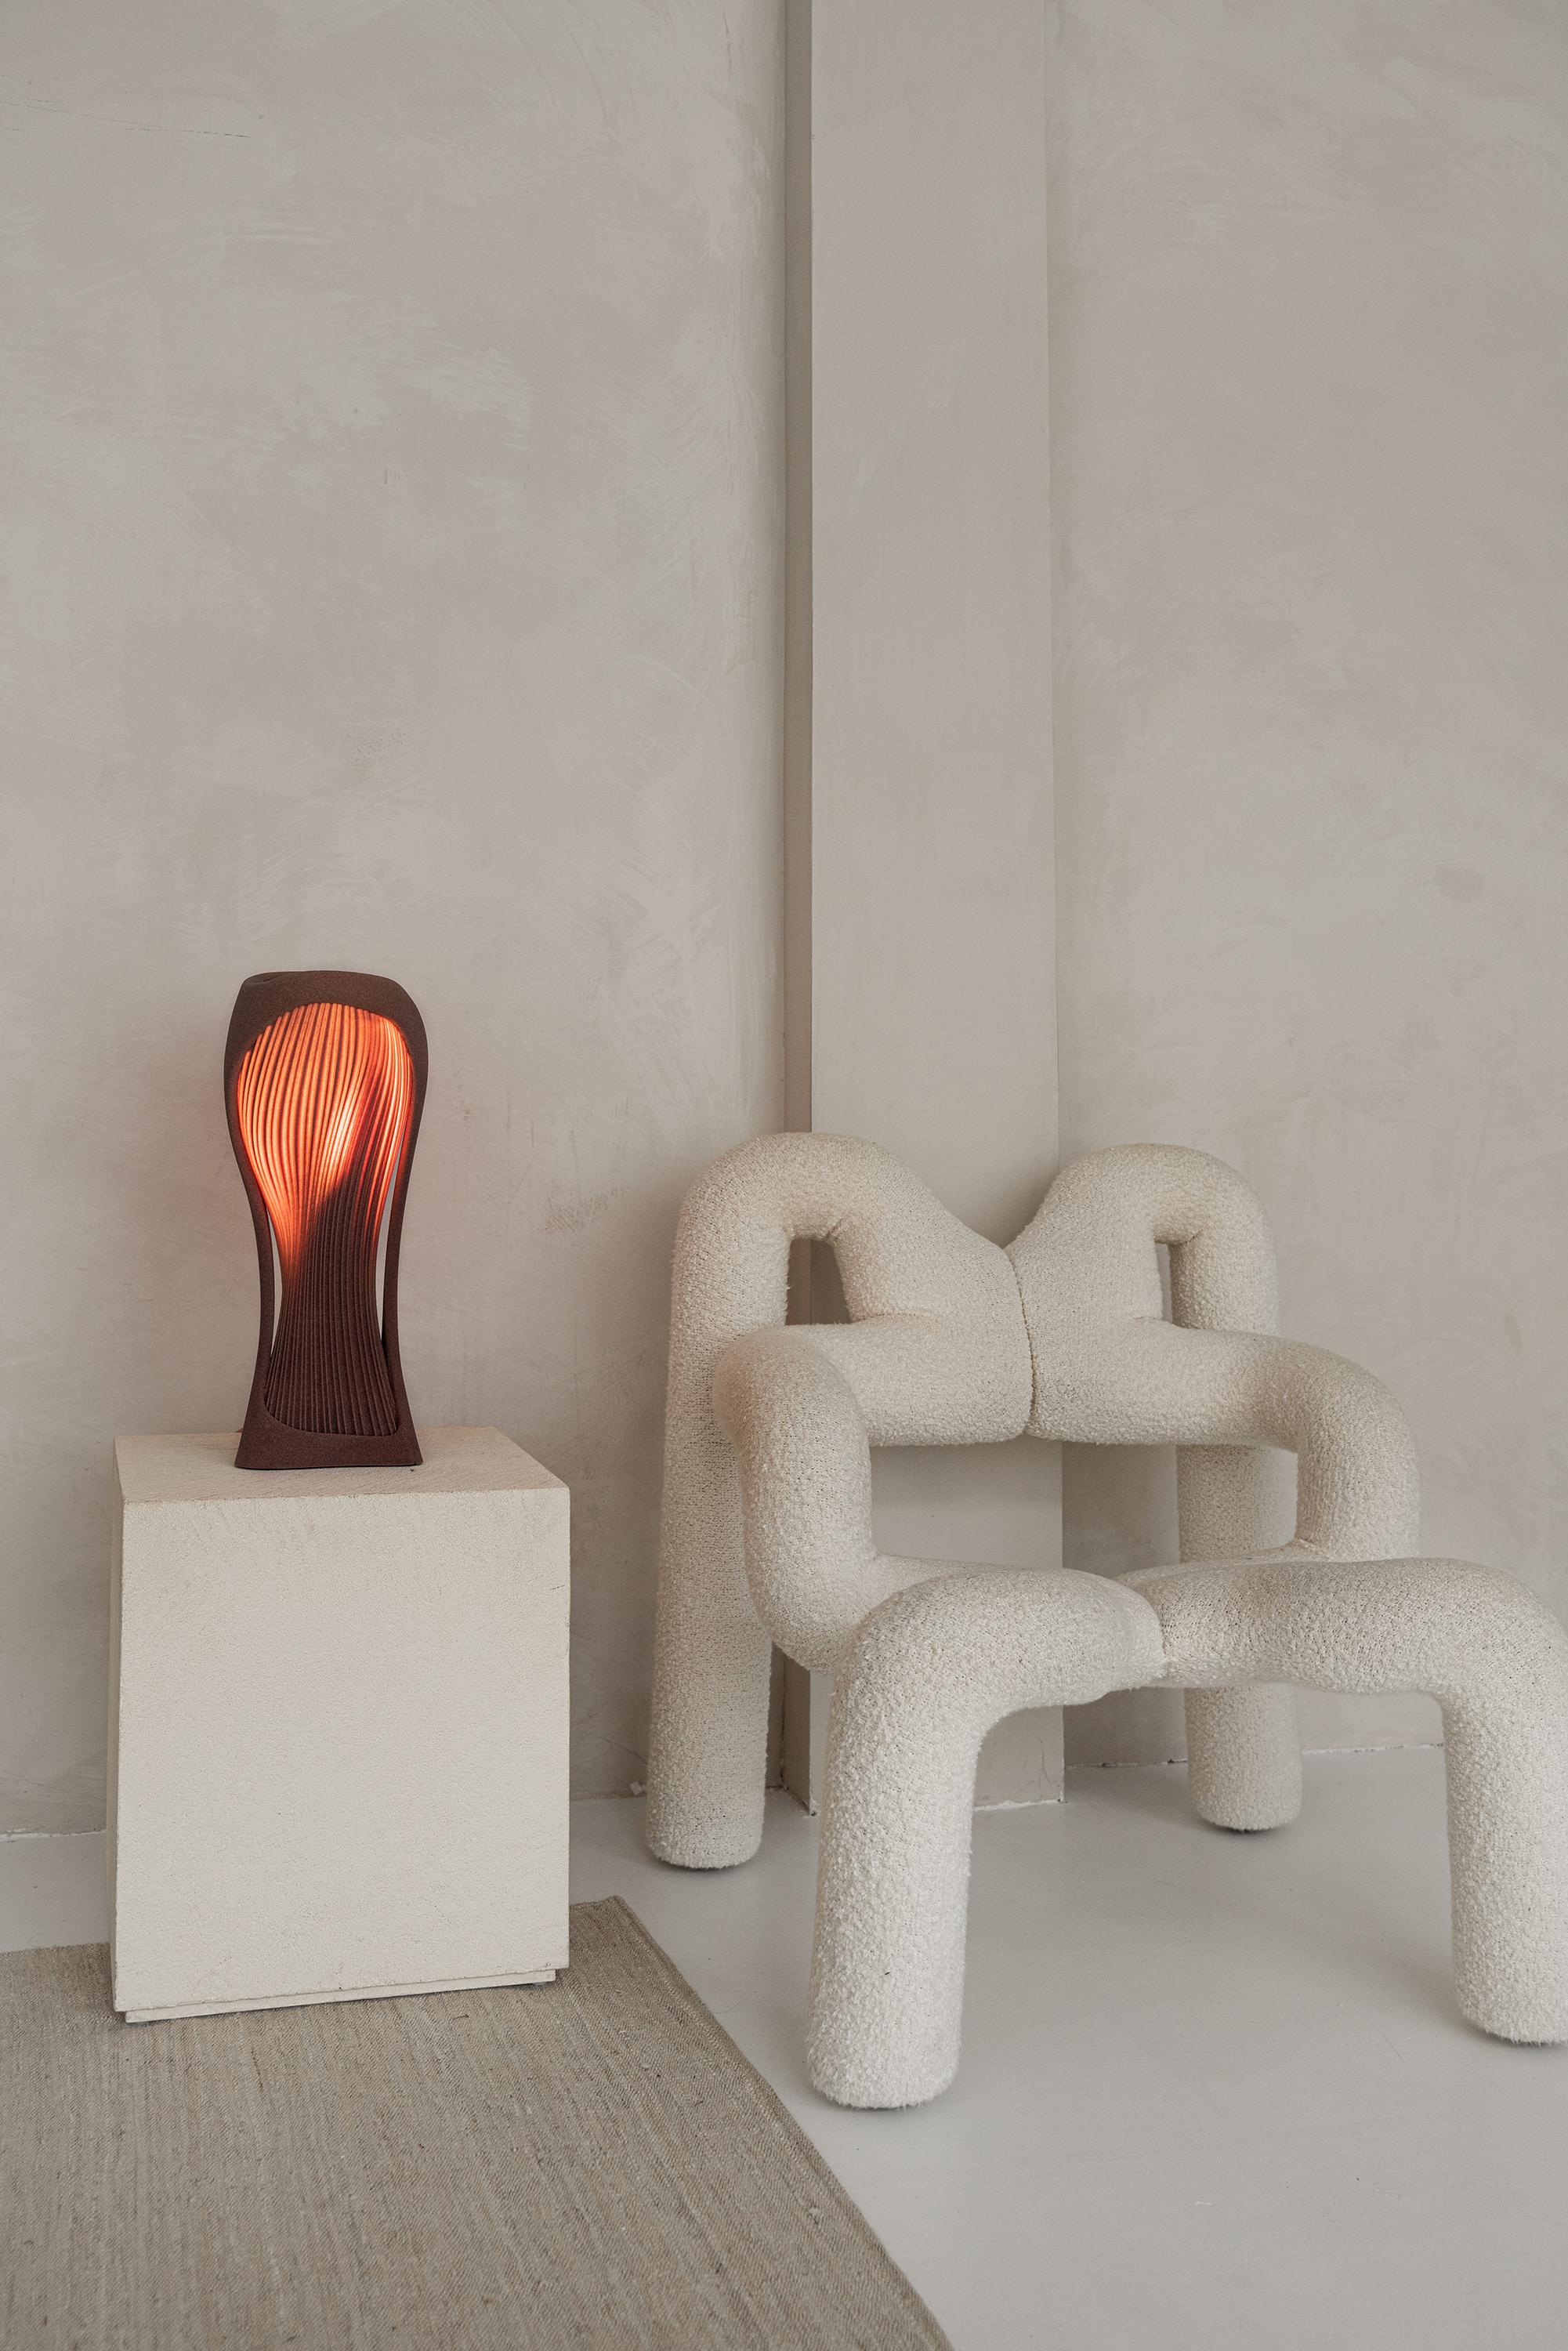 The Para table lamp, part of the Dune Collection, was inspired by the natural beauty of the desert landscape, and has been meticulously crafted using advanced 3D printing technology from quartz sand.

The lamp emanates a warm, ambient glow that